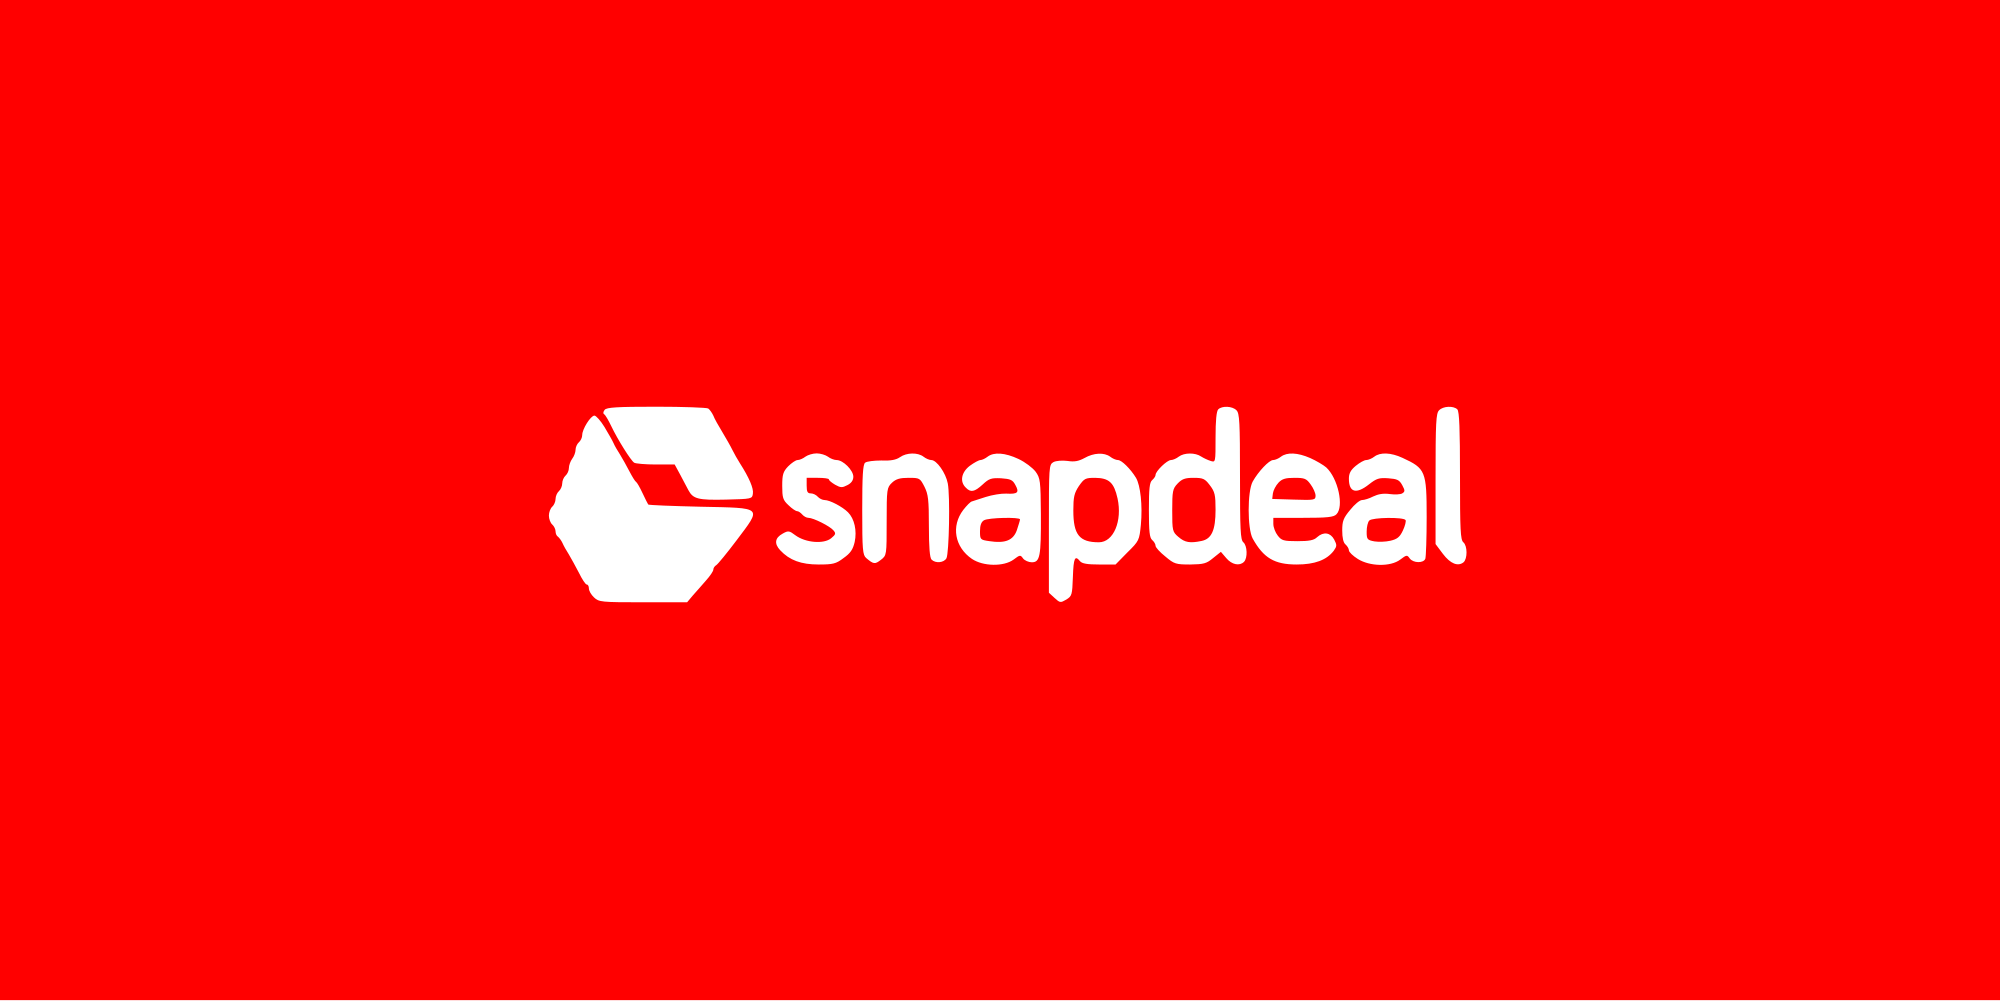 Snapdeal.png PlusPng.com 